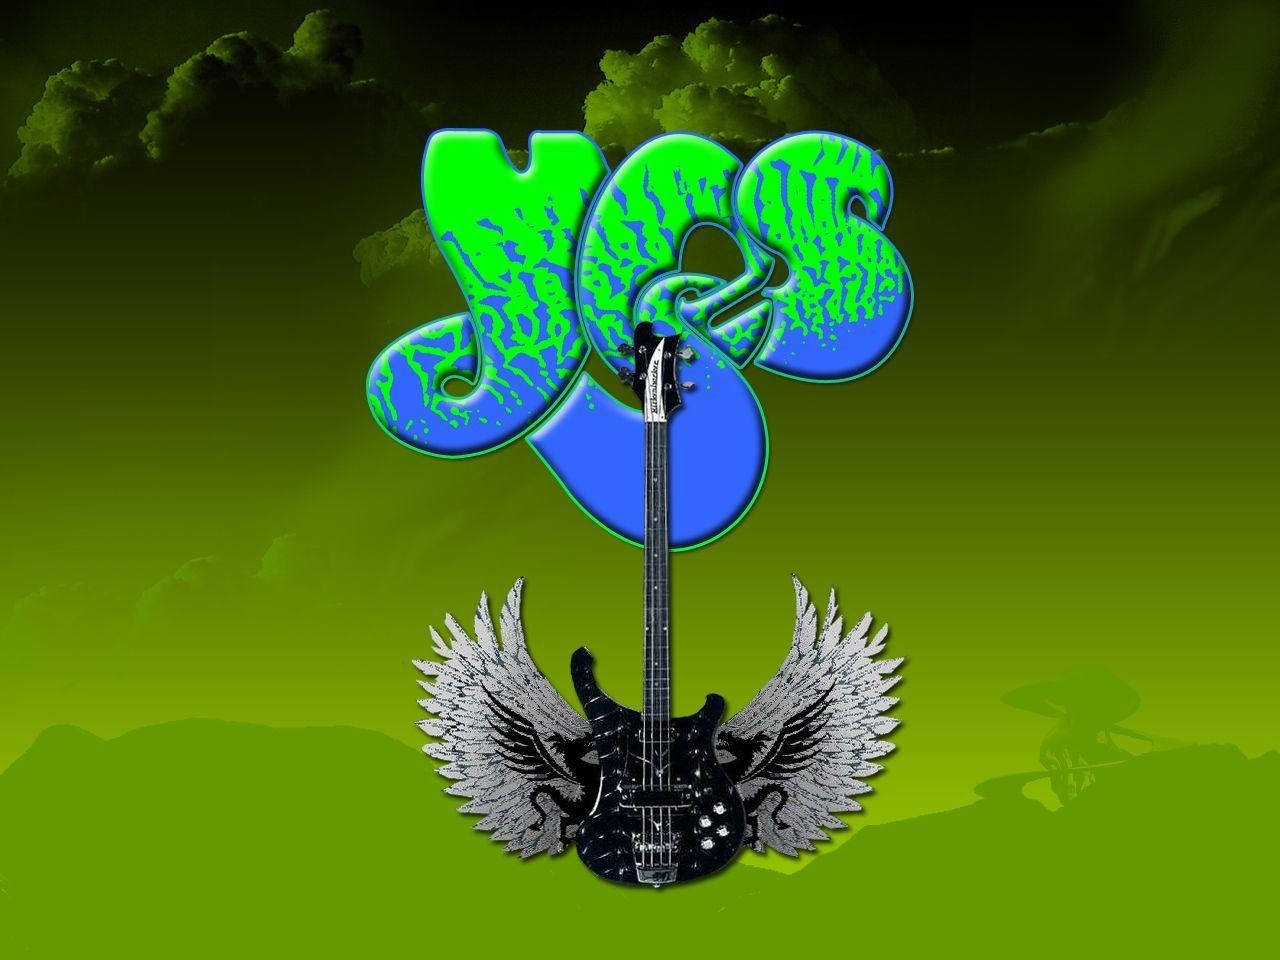 Download Yes Band Acoustic Guitar Wallpaper 